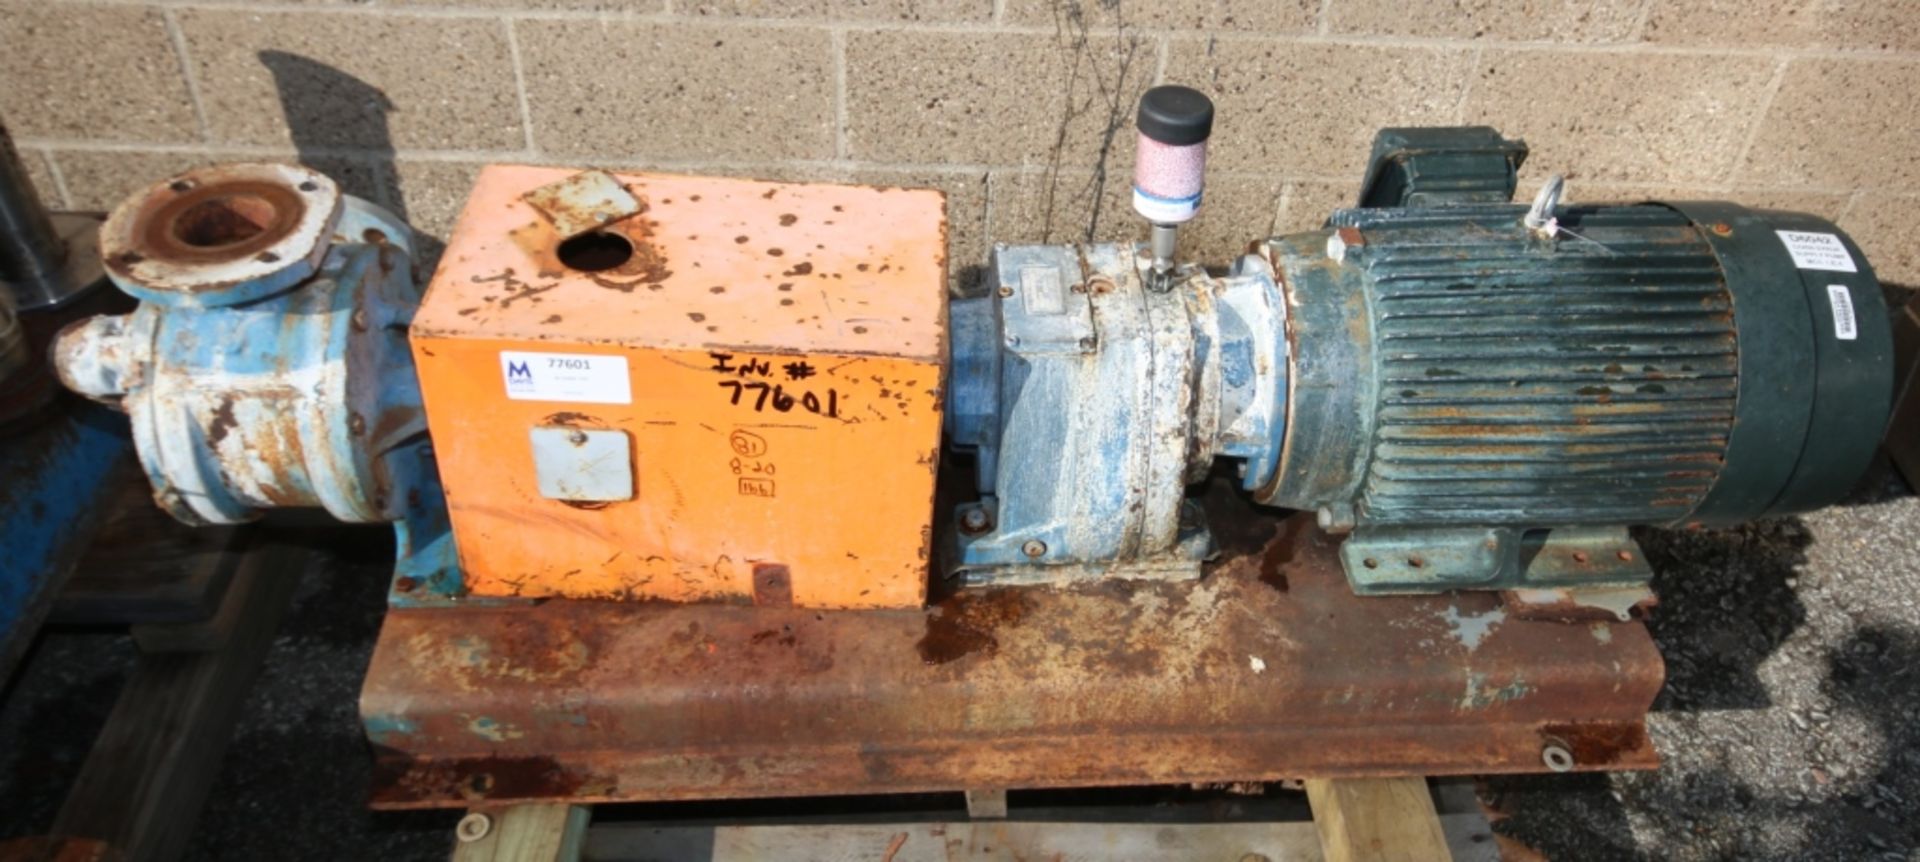 Viking 15 hp Corn Syrup Centrifugal Pump,Model L125, with 1760 rpm Motor, 230/460V 3 Phase, 3" x